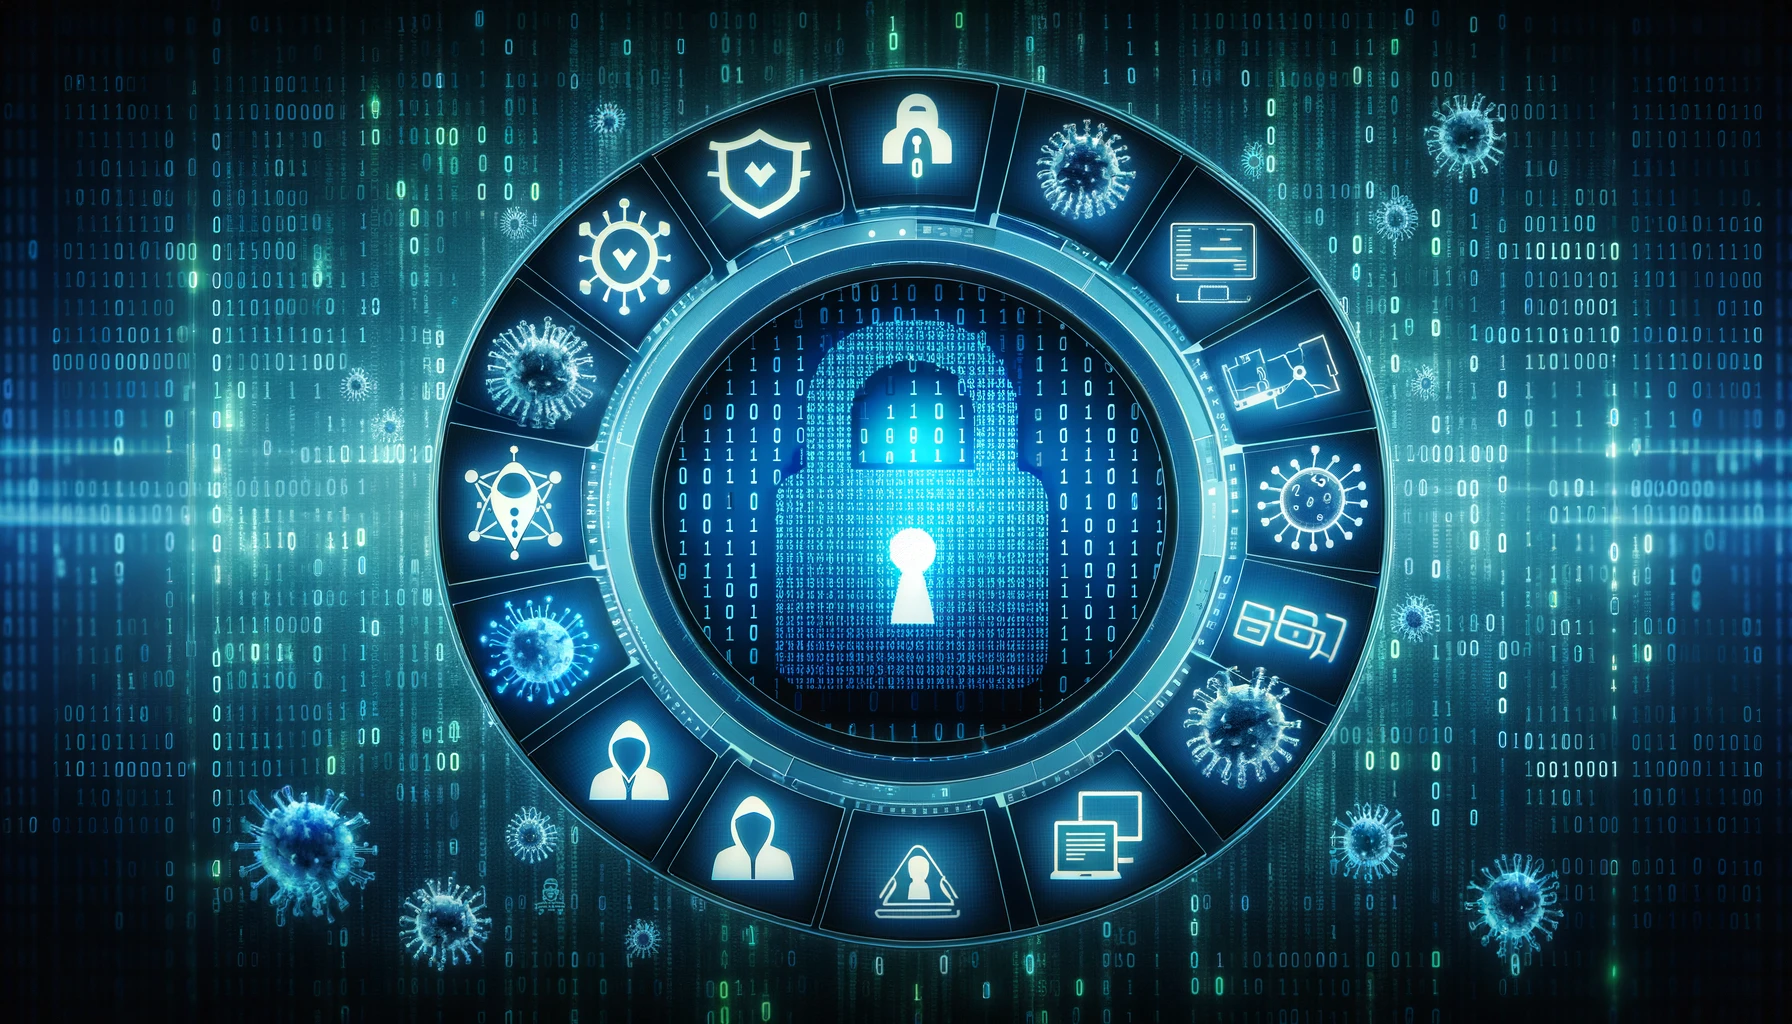 a digital lock icon against a background of binary code, surrounded by representations of various cybersecurity threats, conveying a strong message of digital data protection and security.